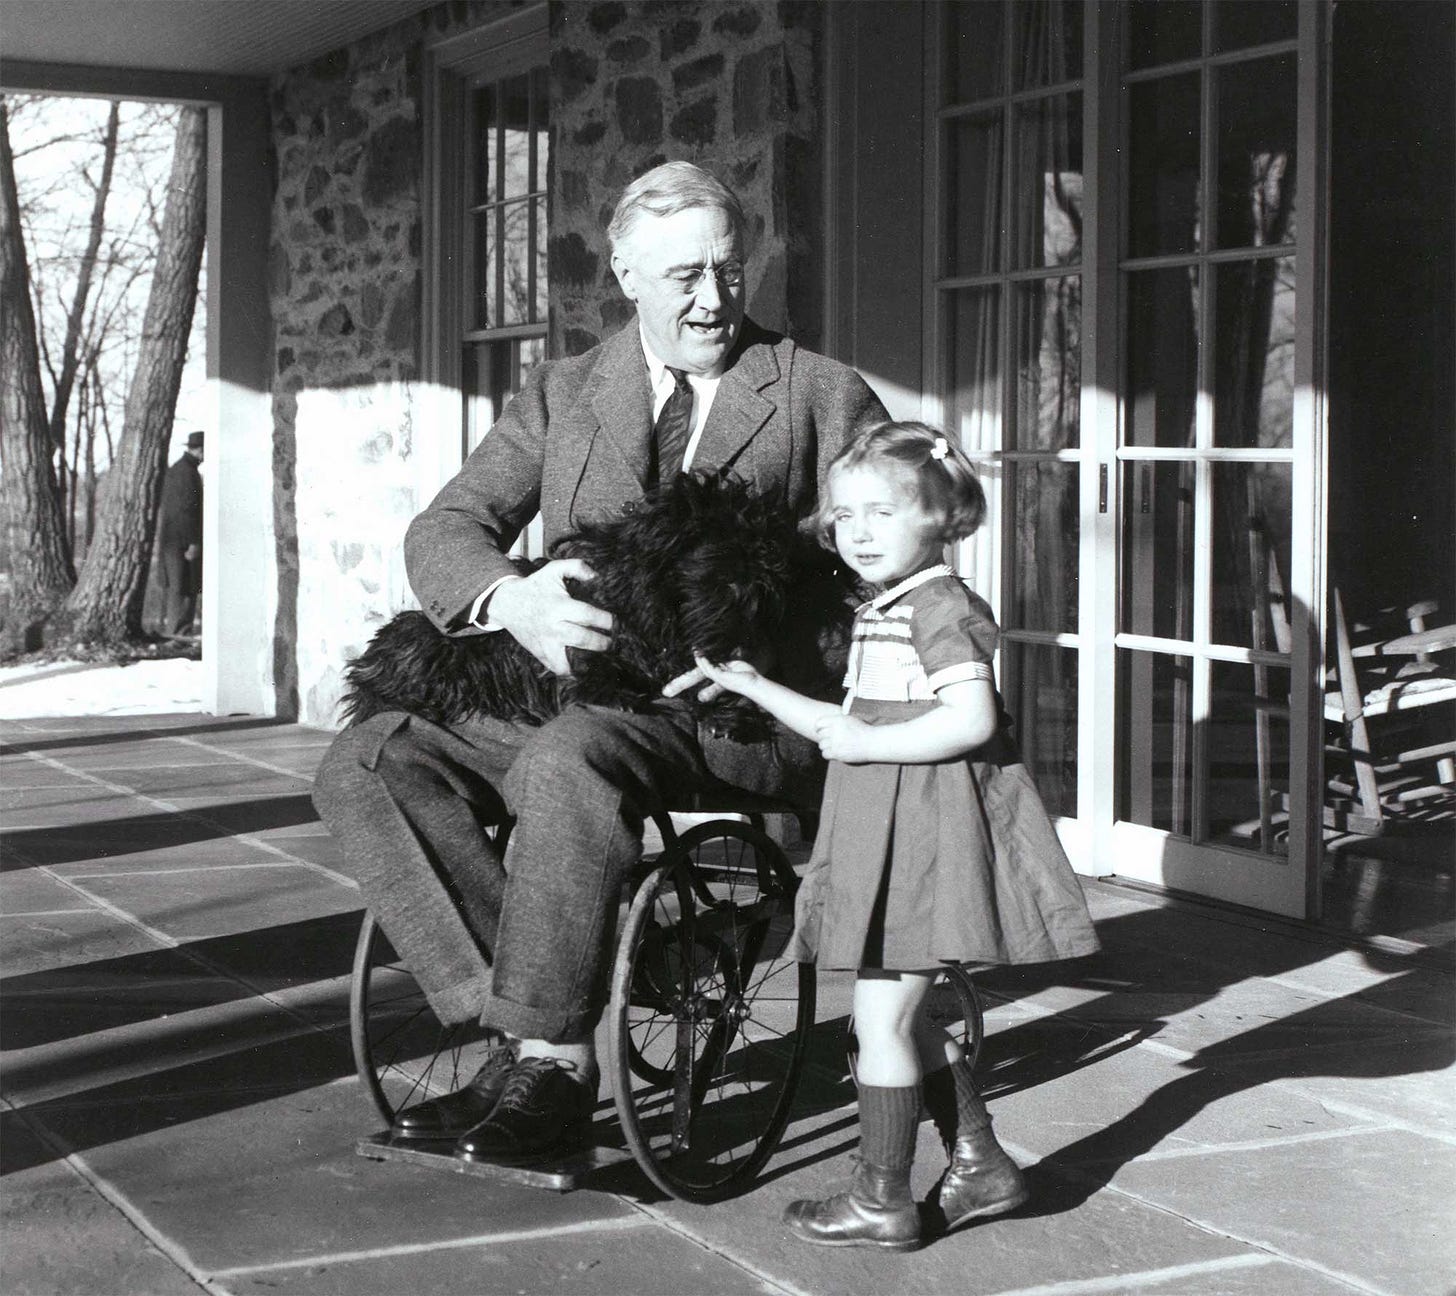 President Roosevelt seated in a wheelchair with a puppy dog on his lap, next to a young girl.